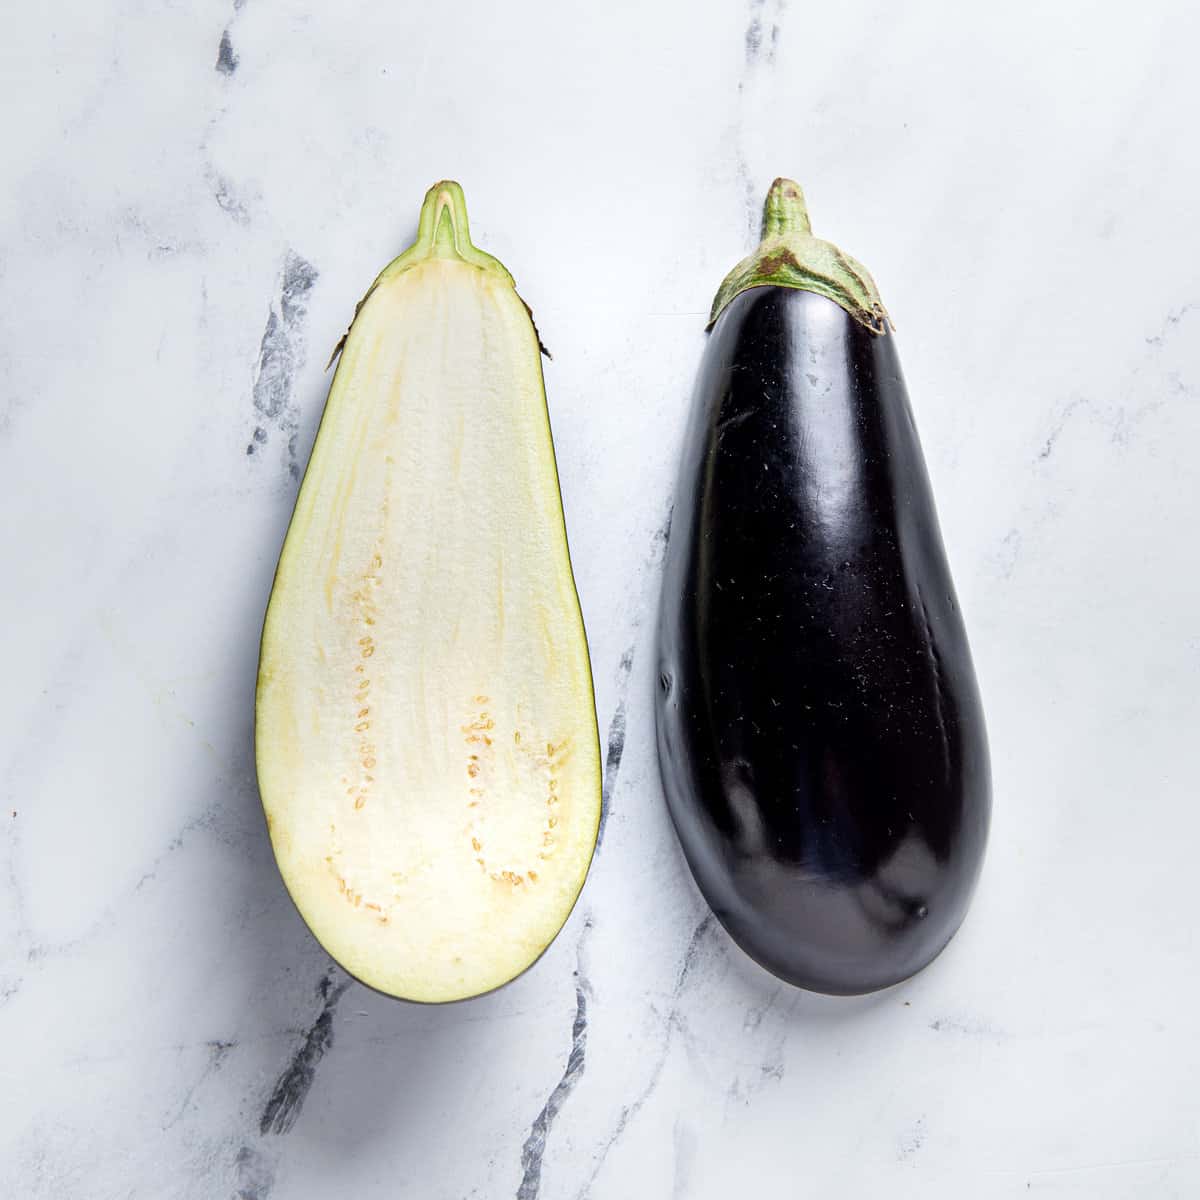 Eggplant sliced in half on a counter.